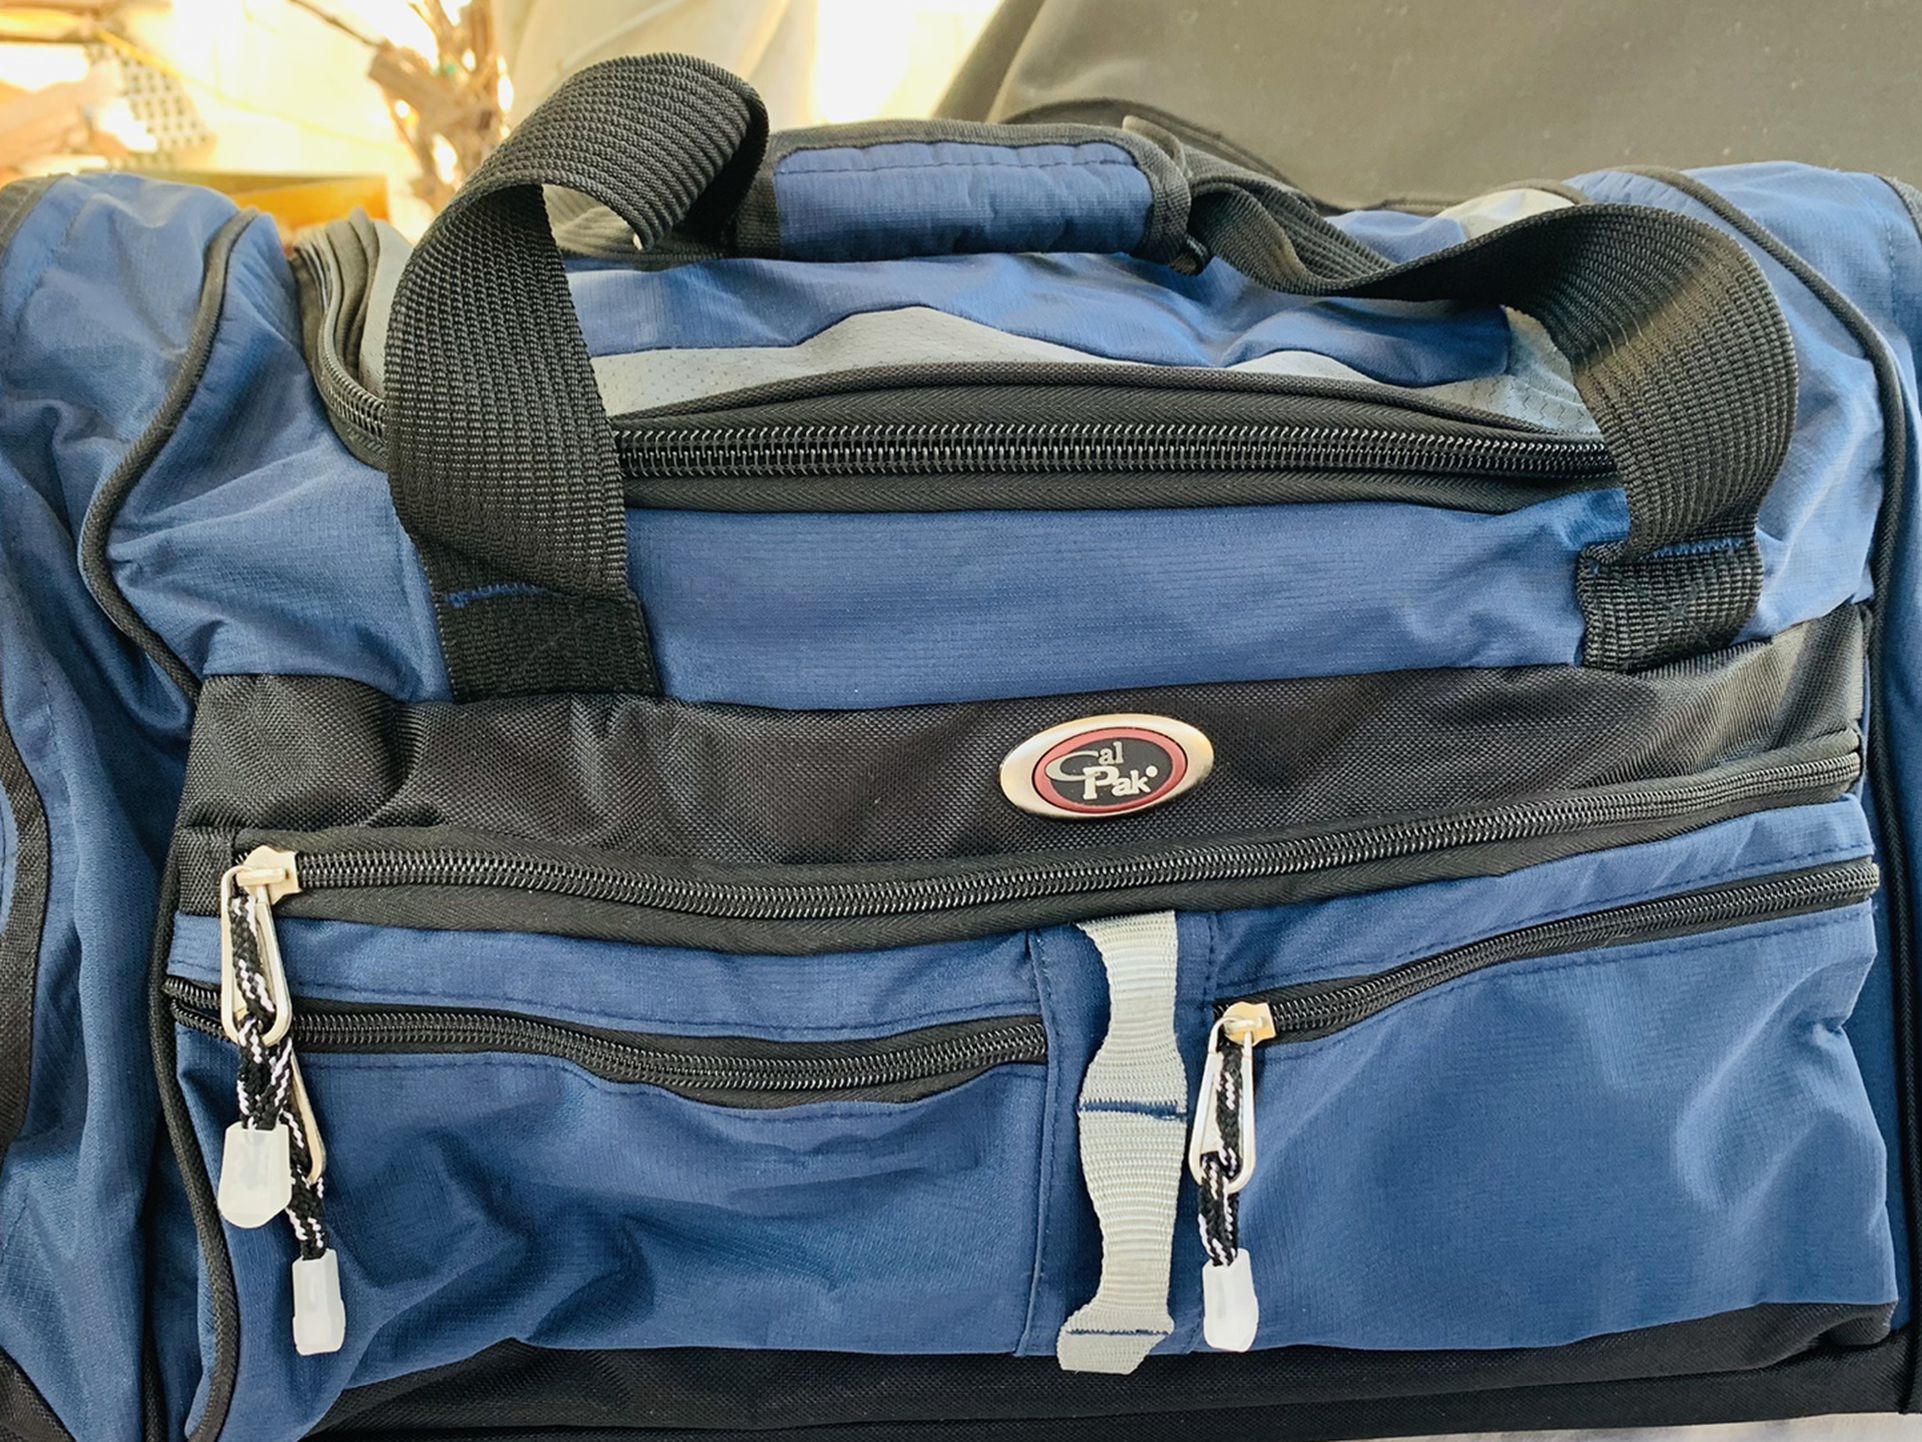 Travel Duffle Bag With Wheels And Handle Like New